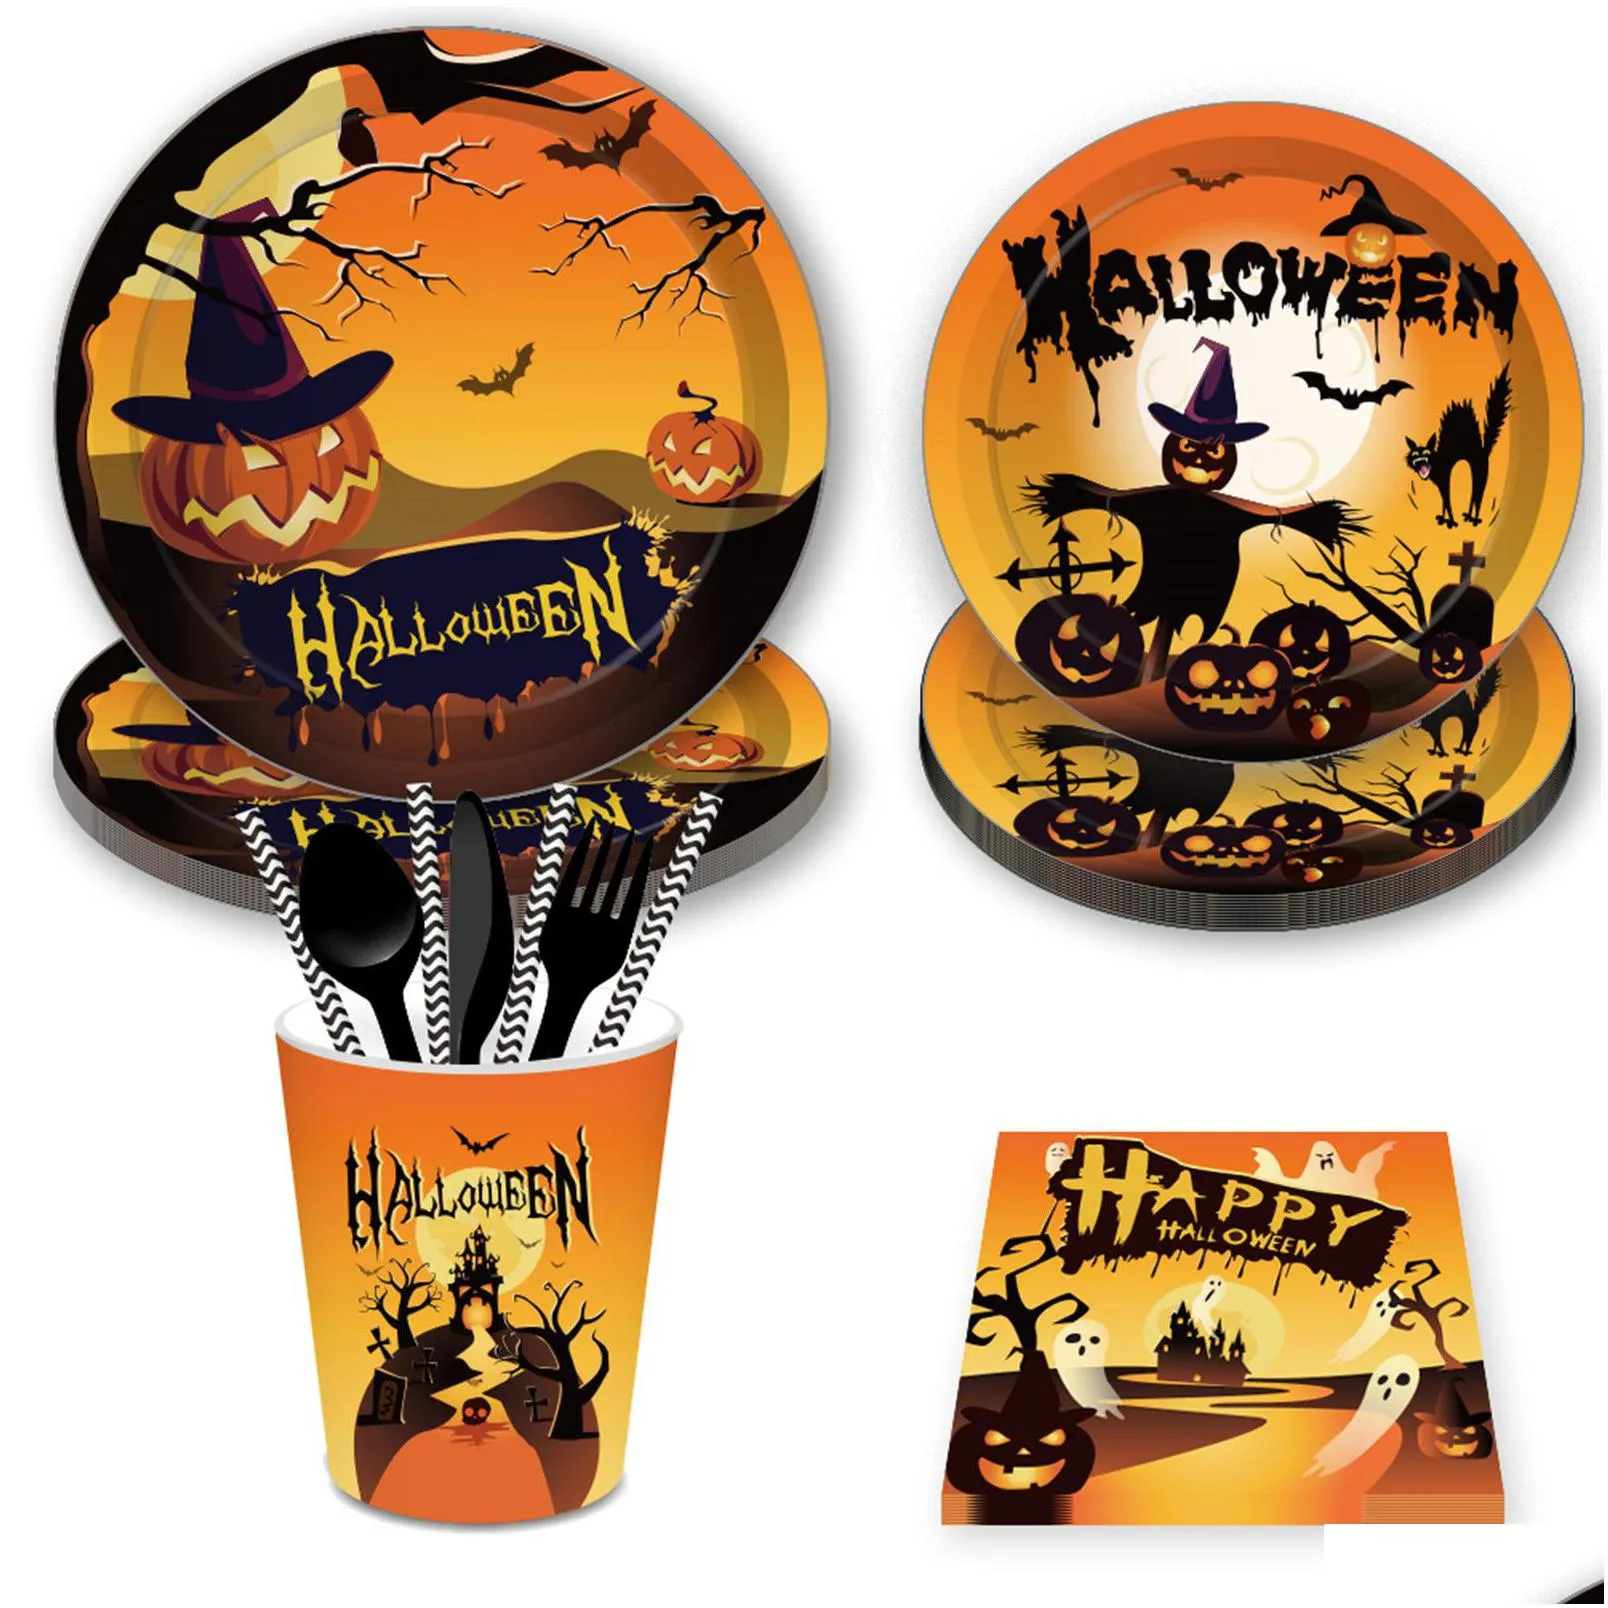 halloween pumpkin paper plates party plates and napkins birthday party supplie set party dinnerware serves 8 guests for plates, napkins, cups